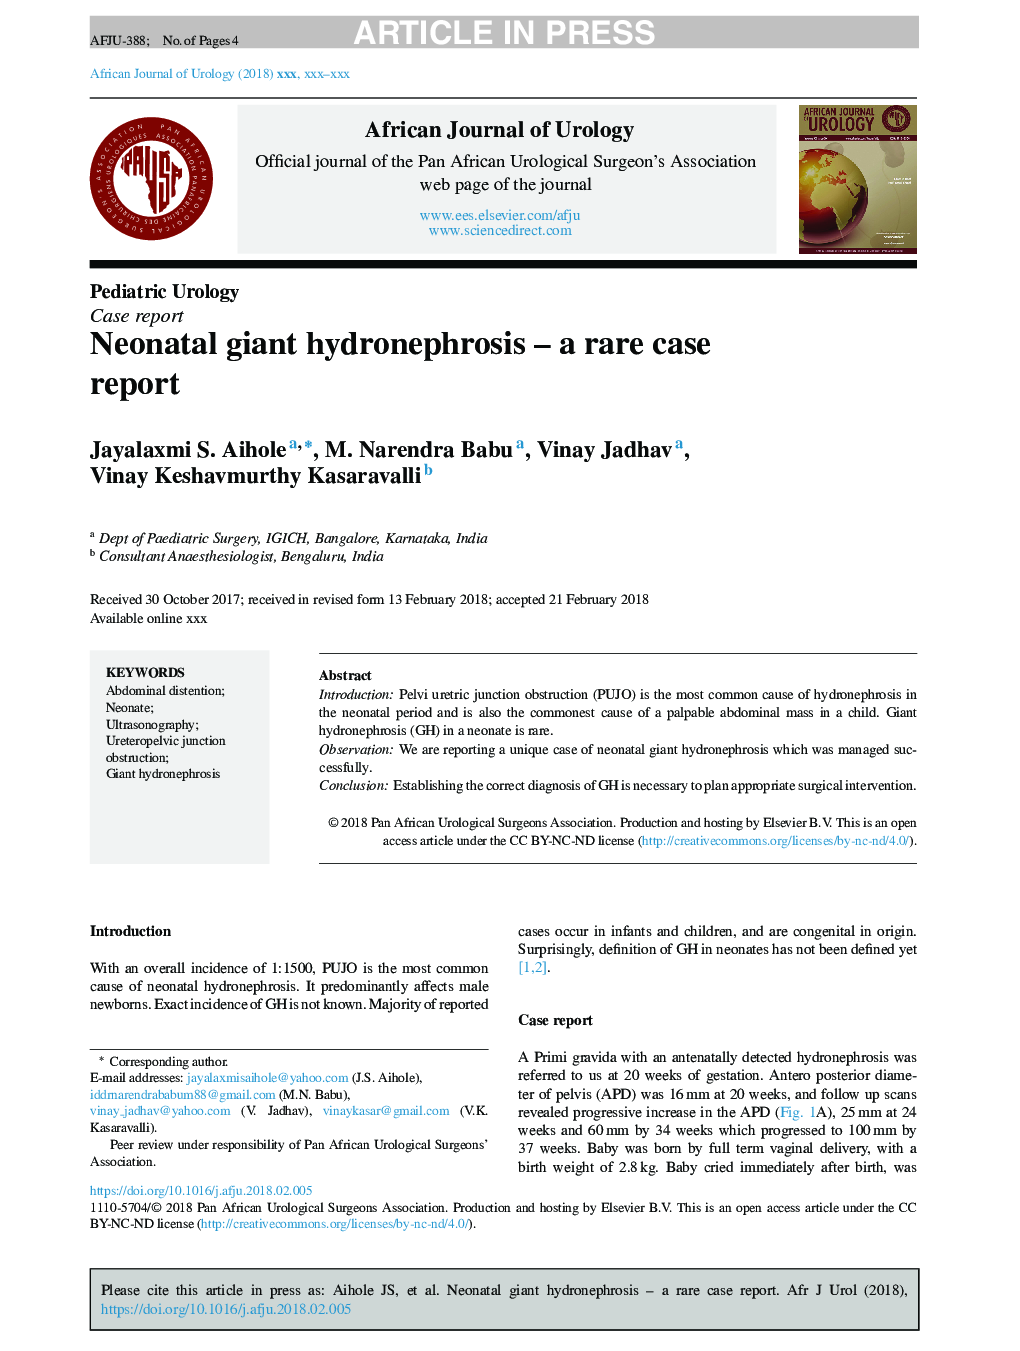 Neonatal giant hydronephrosis - a rare case report